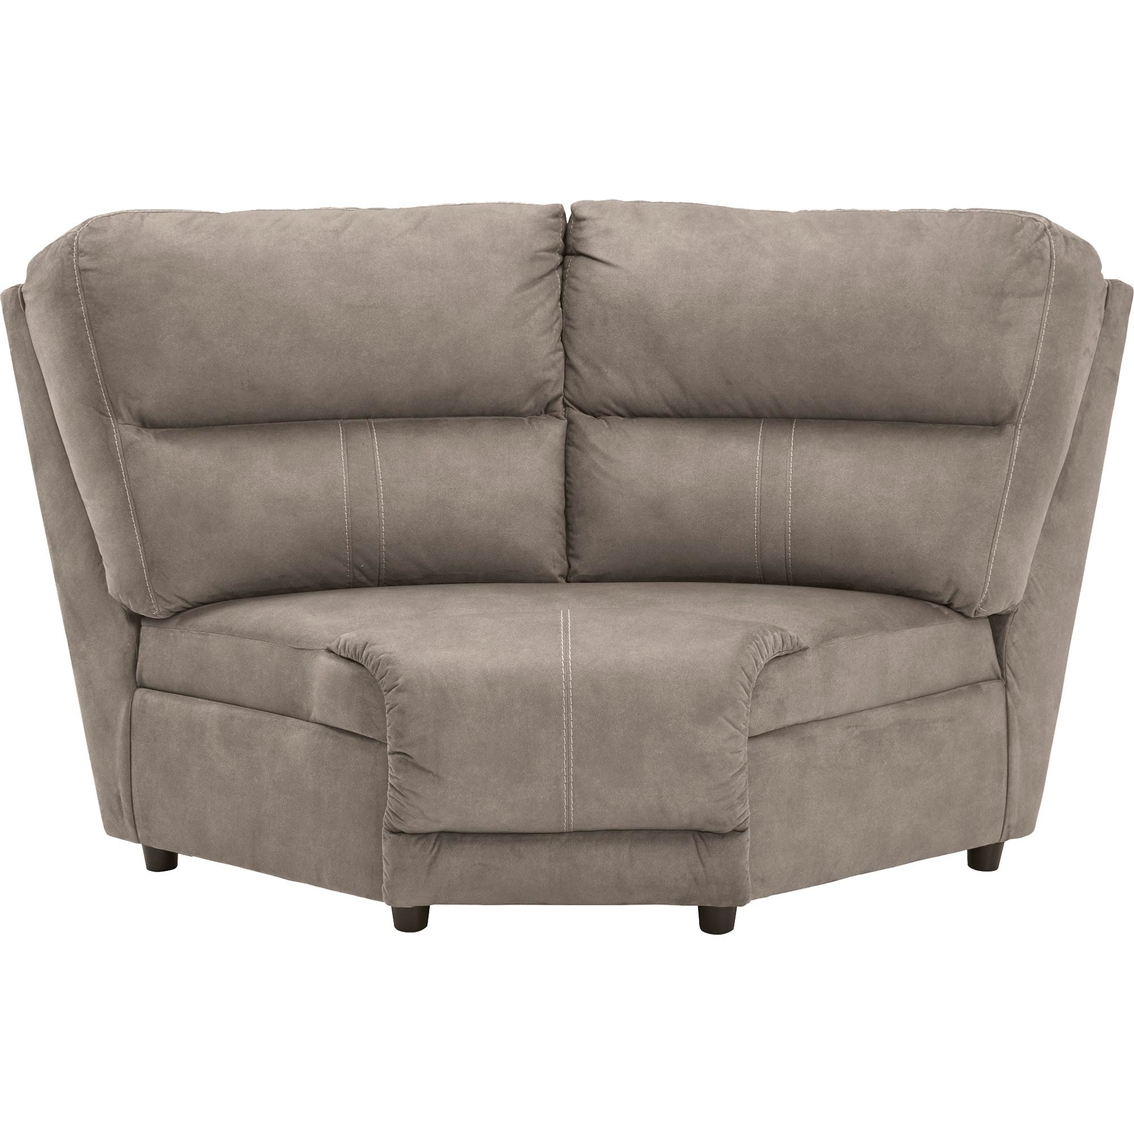 Signature Design by Ashley Cavalcade Power Reclining 4 pc. Sectional with Recliner - Image 4 of 9